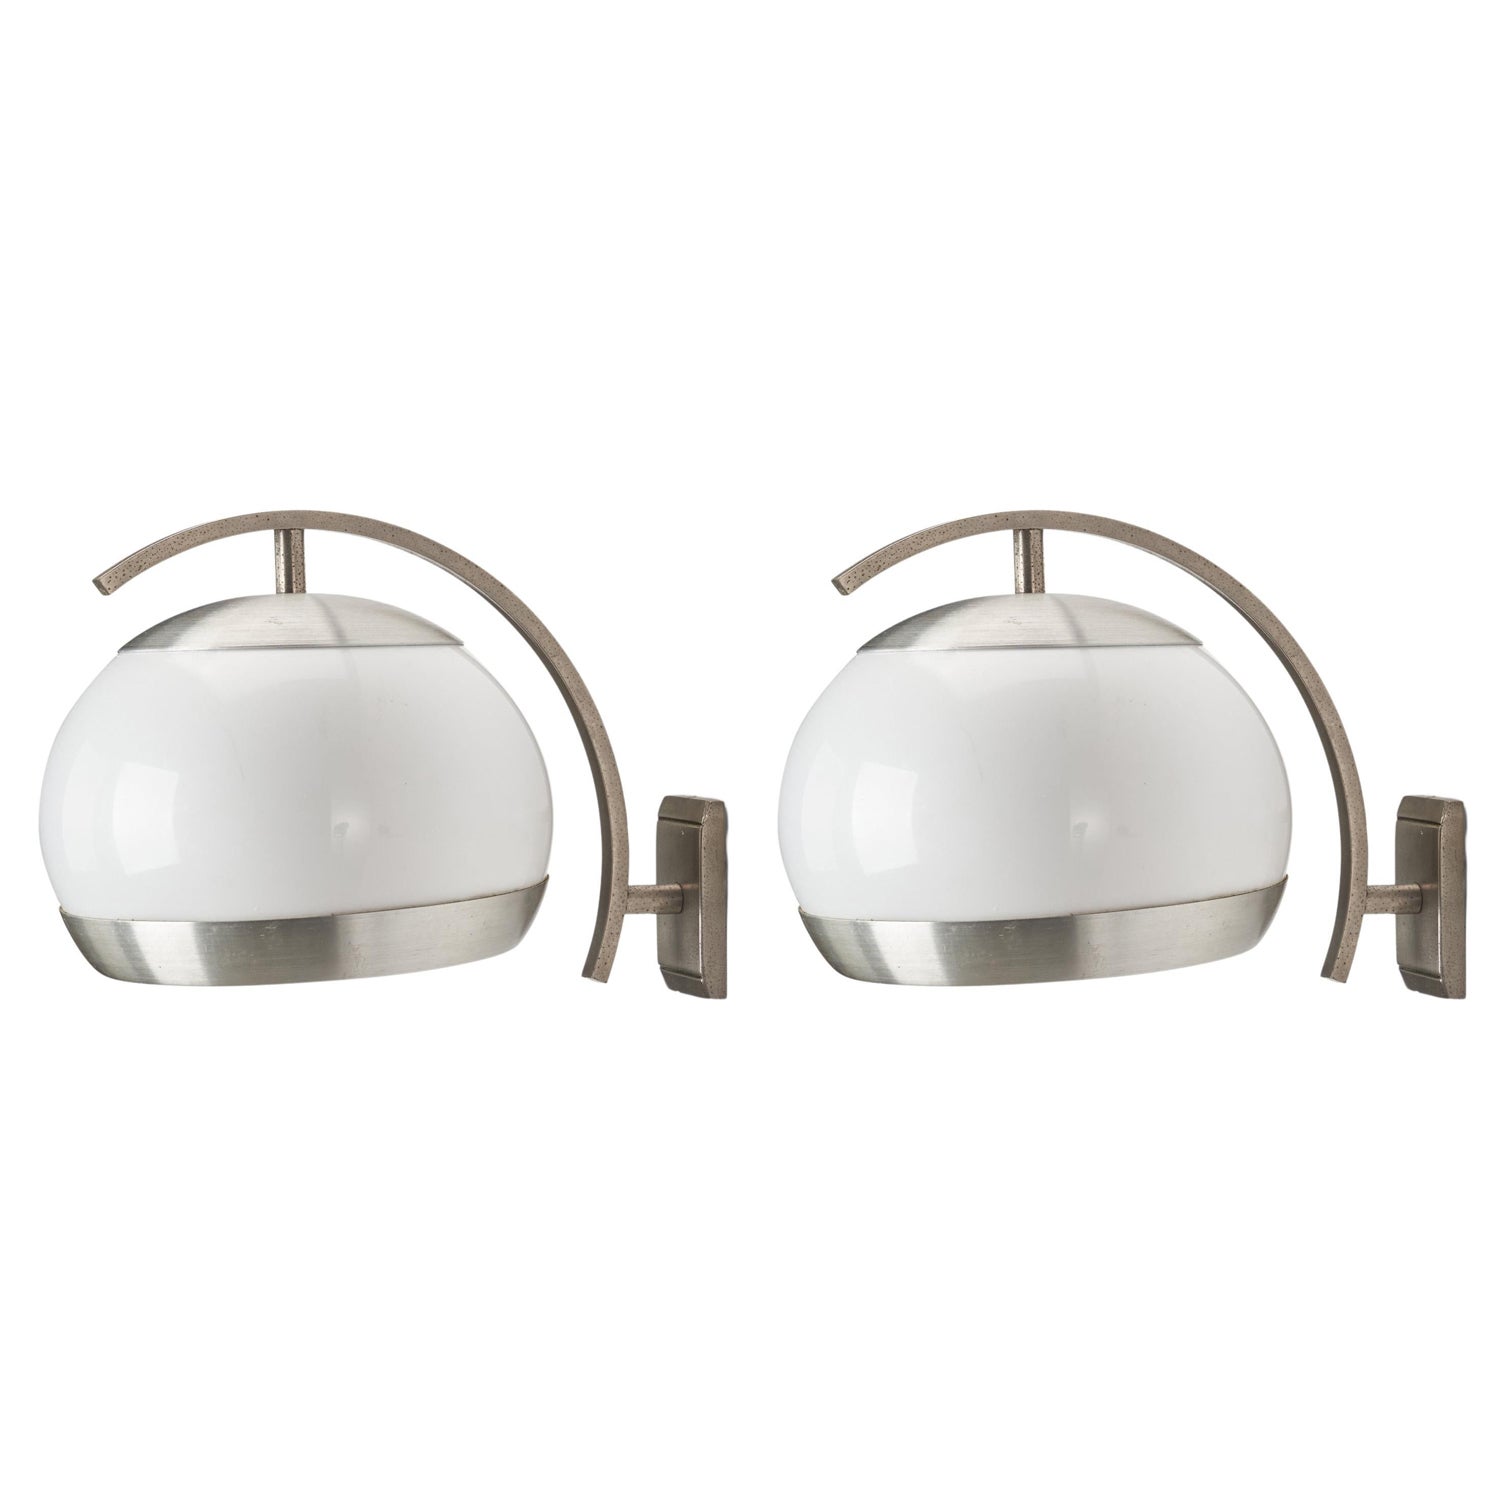 Stilux Milano, Wall Lights, Acrylic, Nickel-plated brass, Italy, 1960s For Sale